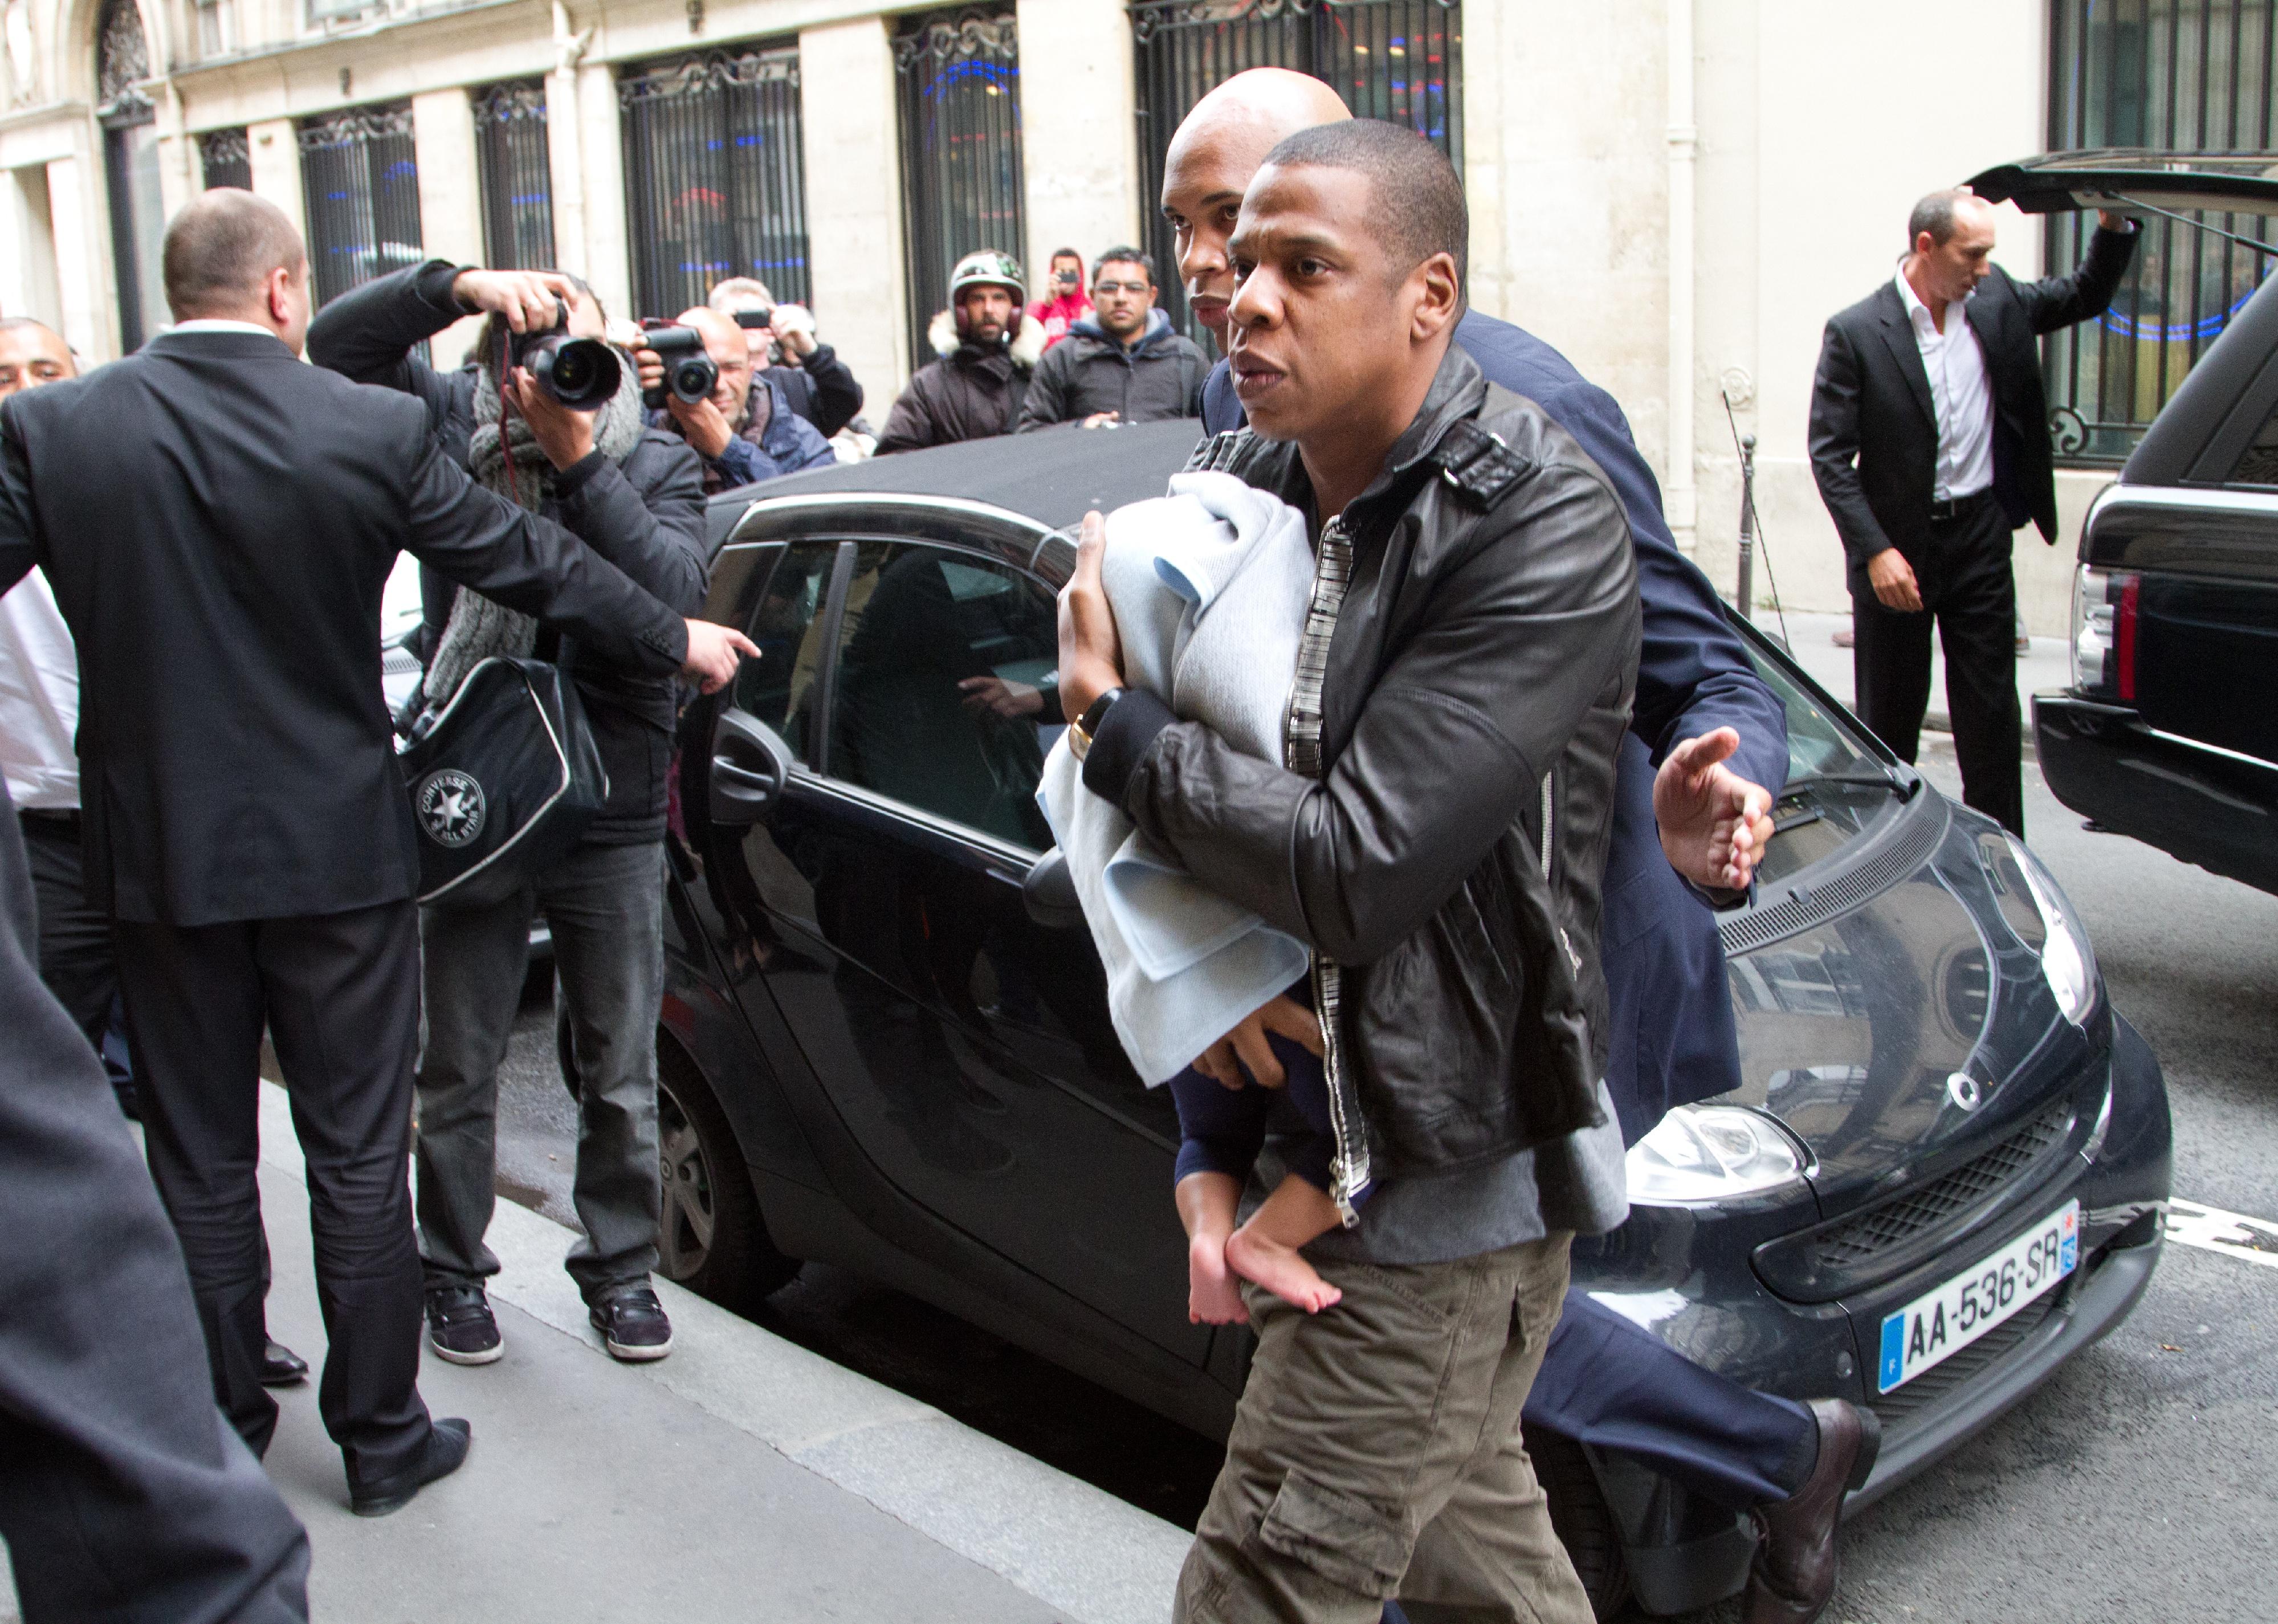 Jay Z and Blue Ivy Carter arrive at the 'MEURICE' hotel 